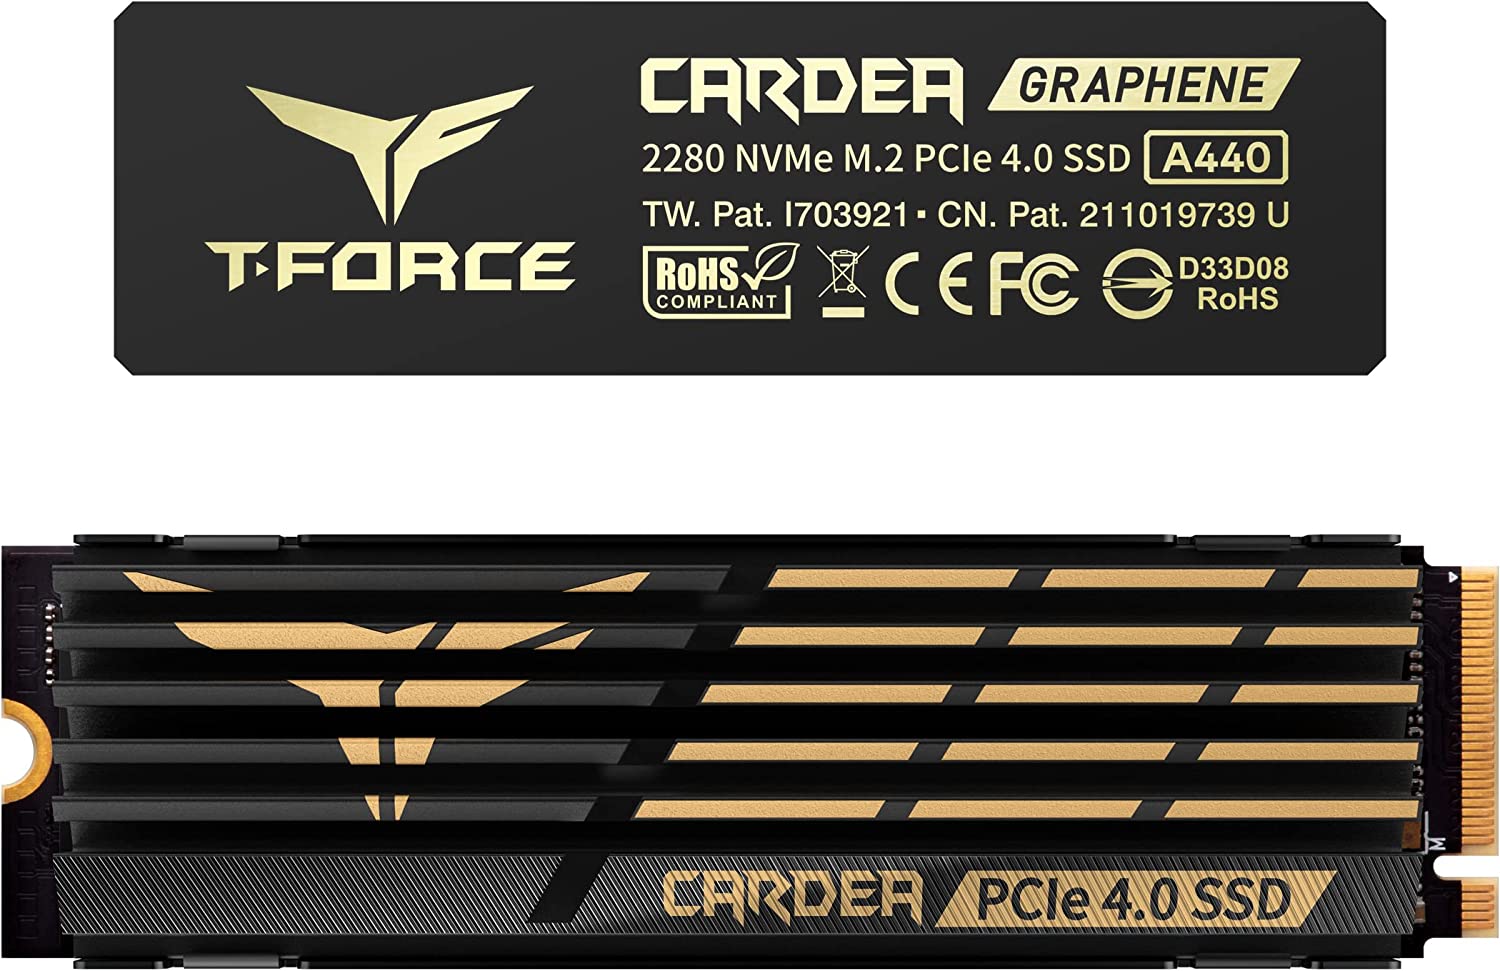 TEAMGROUP T-Force CARDEA A440 Graphene & Aluminum Heatsink 2TB with DRAM SLC Cache 3D NAND TLC NVMe PCIe Gen4 x4 M.2 2280 Internal SSD Works with PS5, $134.99, Amazon and Newegg